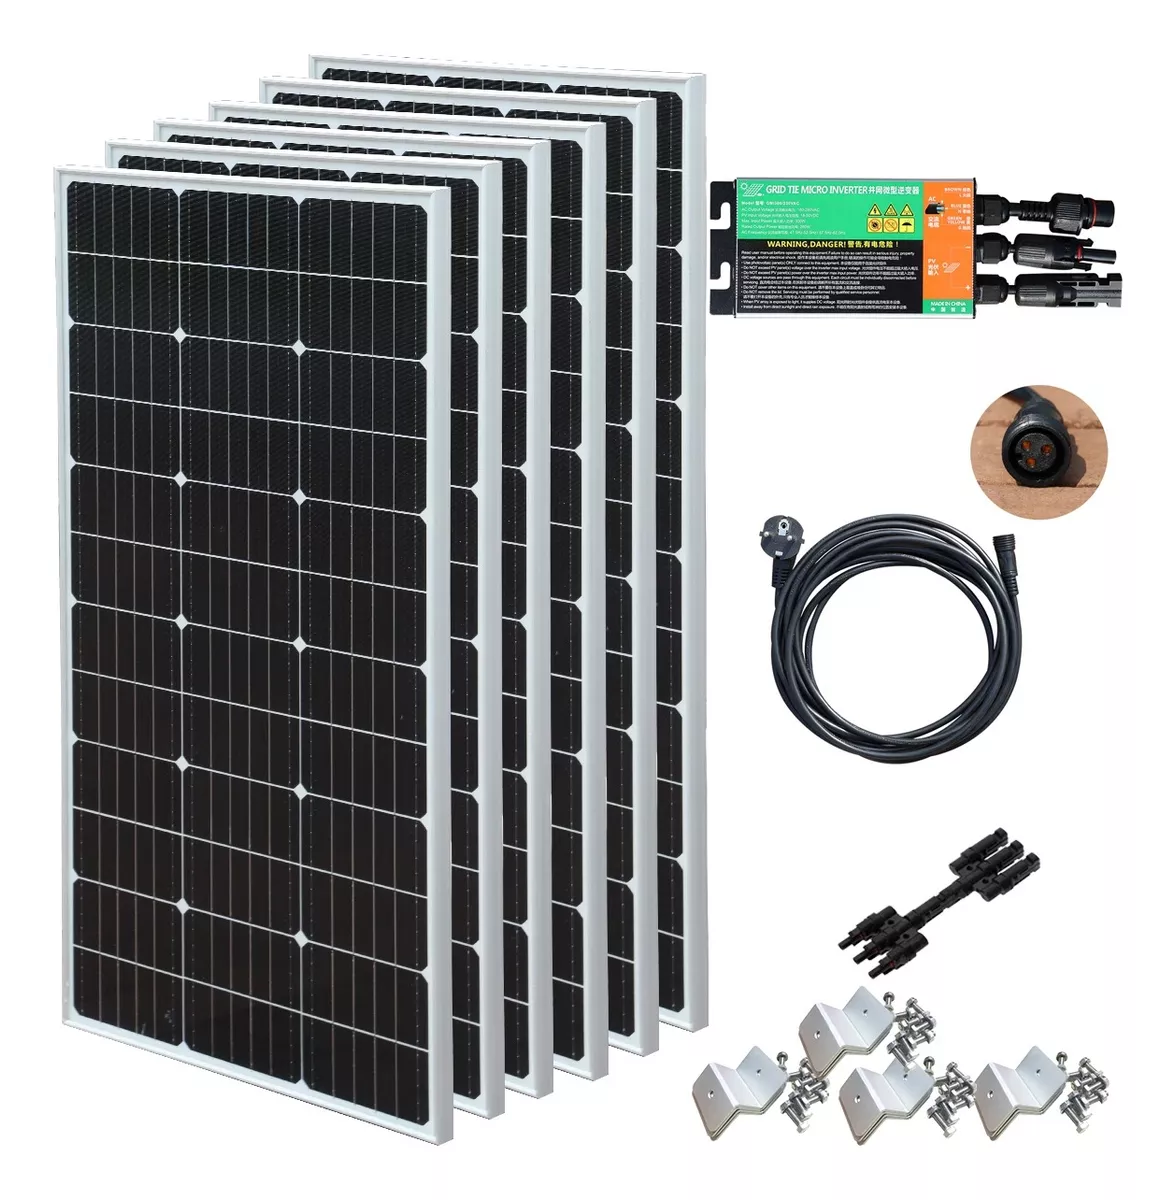 Xinpuguang Photovoltaic Power Plant Pv Micro Inverter